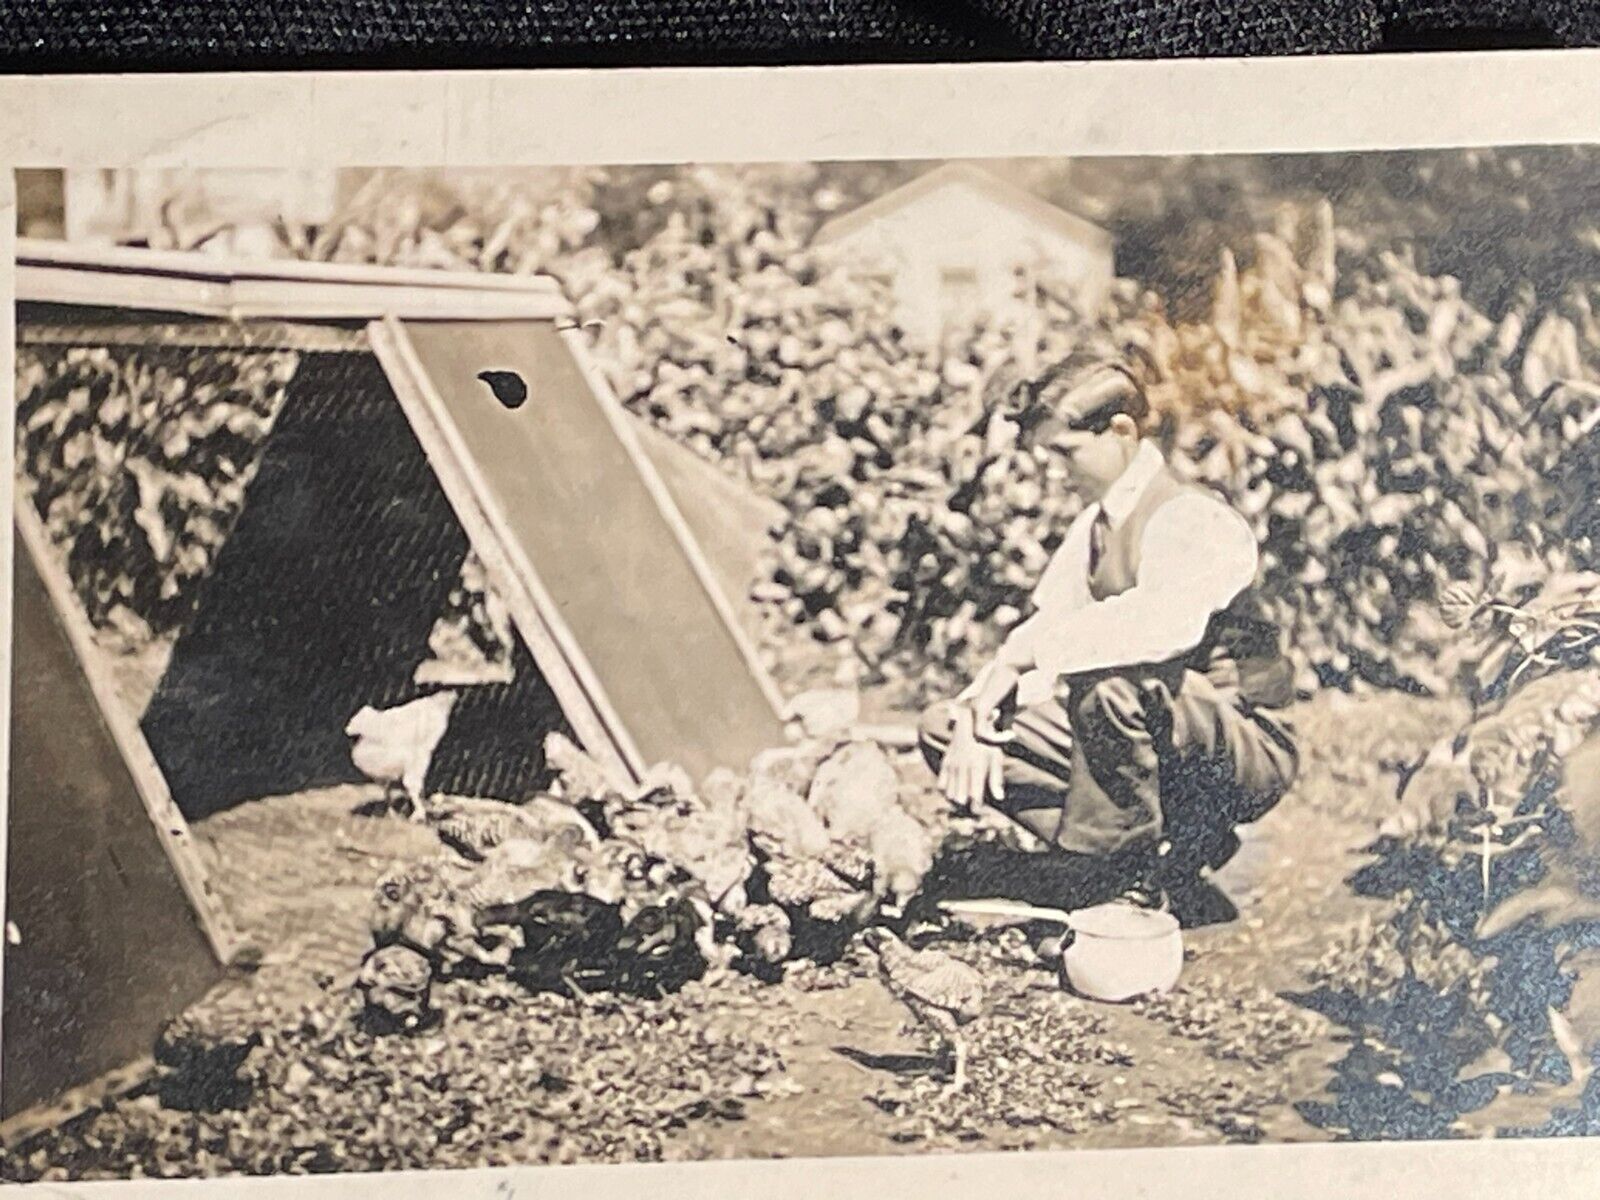 Chickens Coop Farm Man with Chickens RPPC Real Photo c1910s Postcard A75